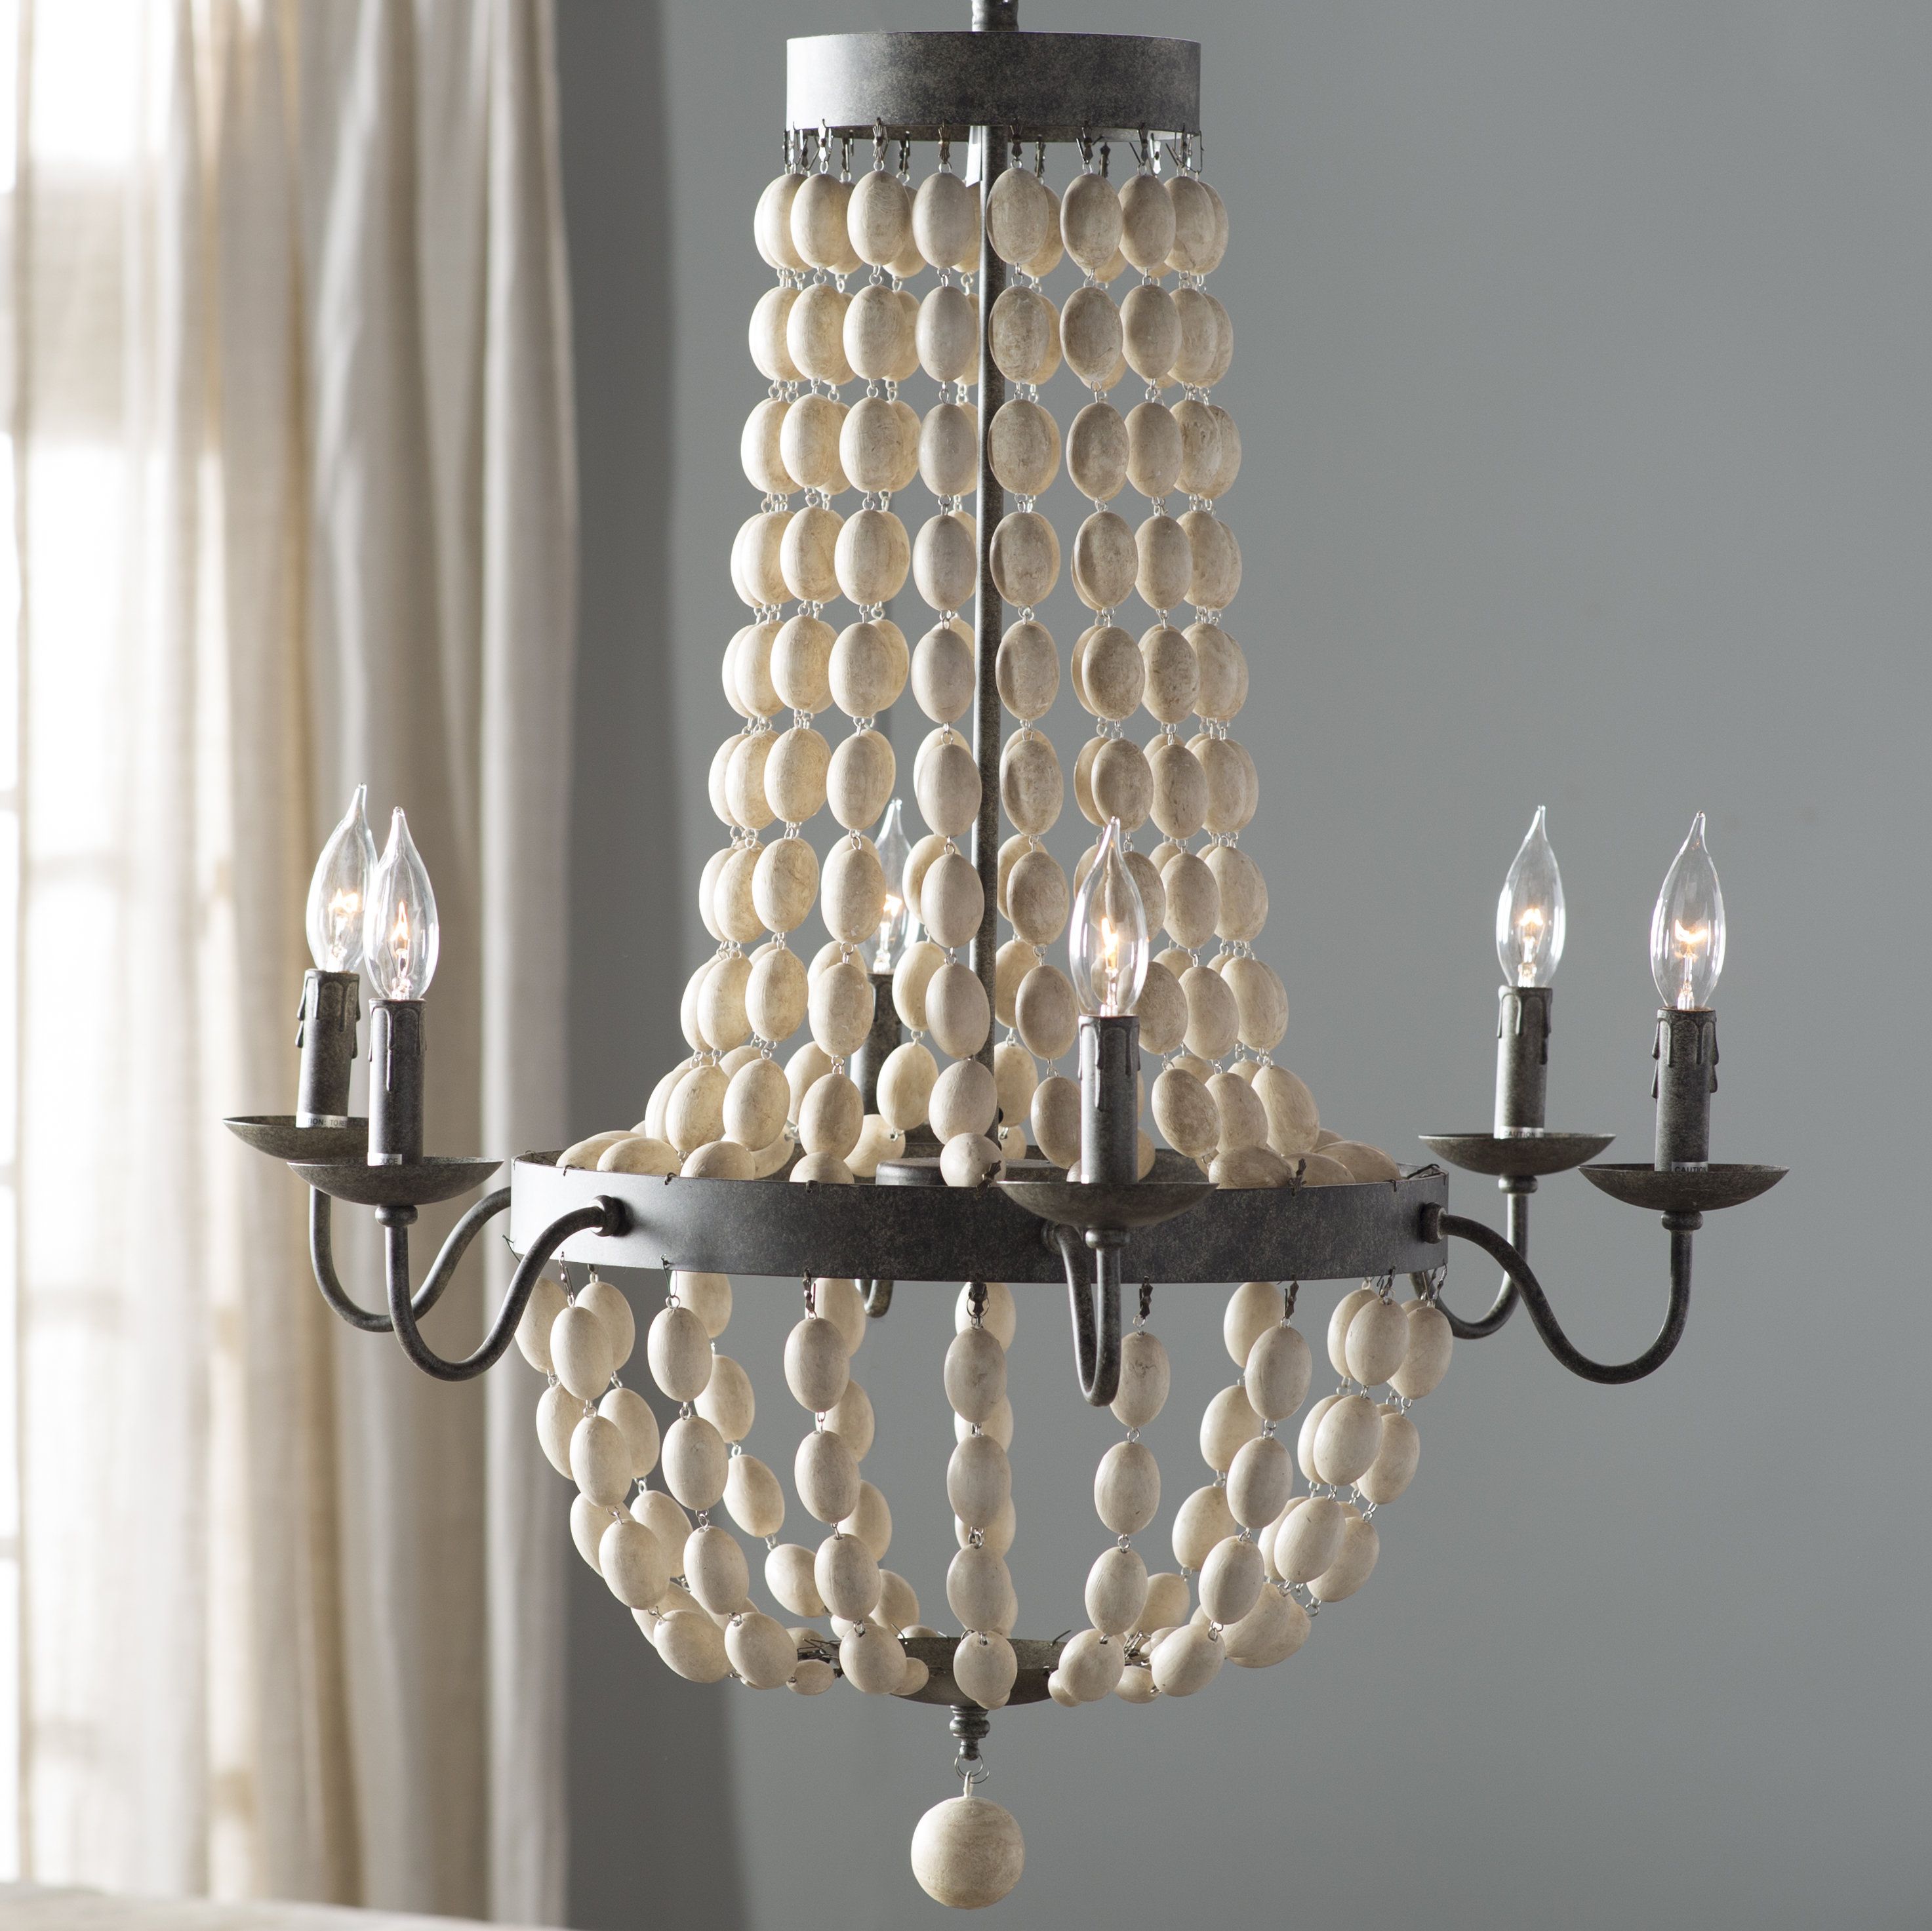 Bargas 6 Light Empire Chandelier With Ladonna 5 Light Novelty Chandeliers (View 7 of 30)